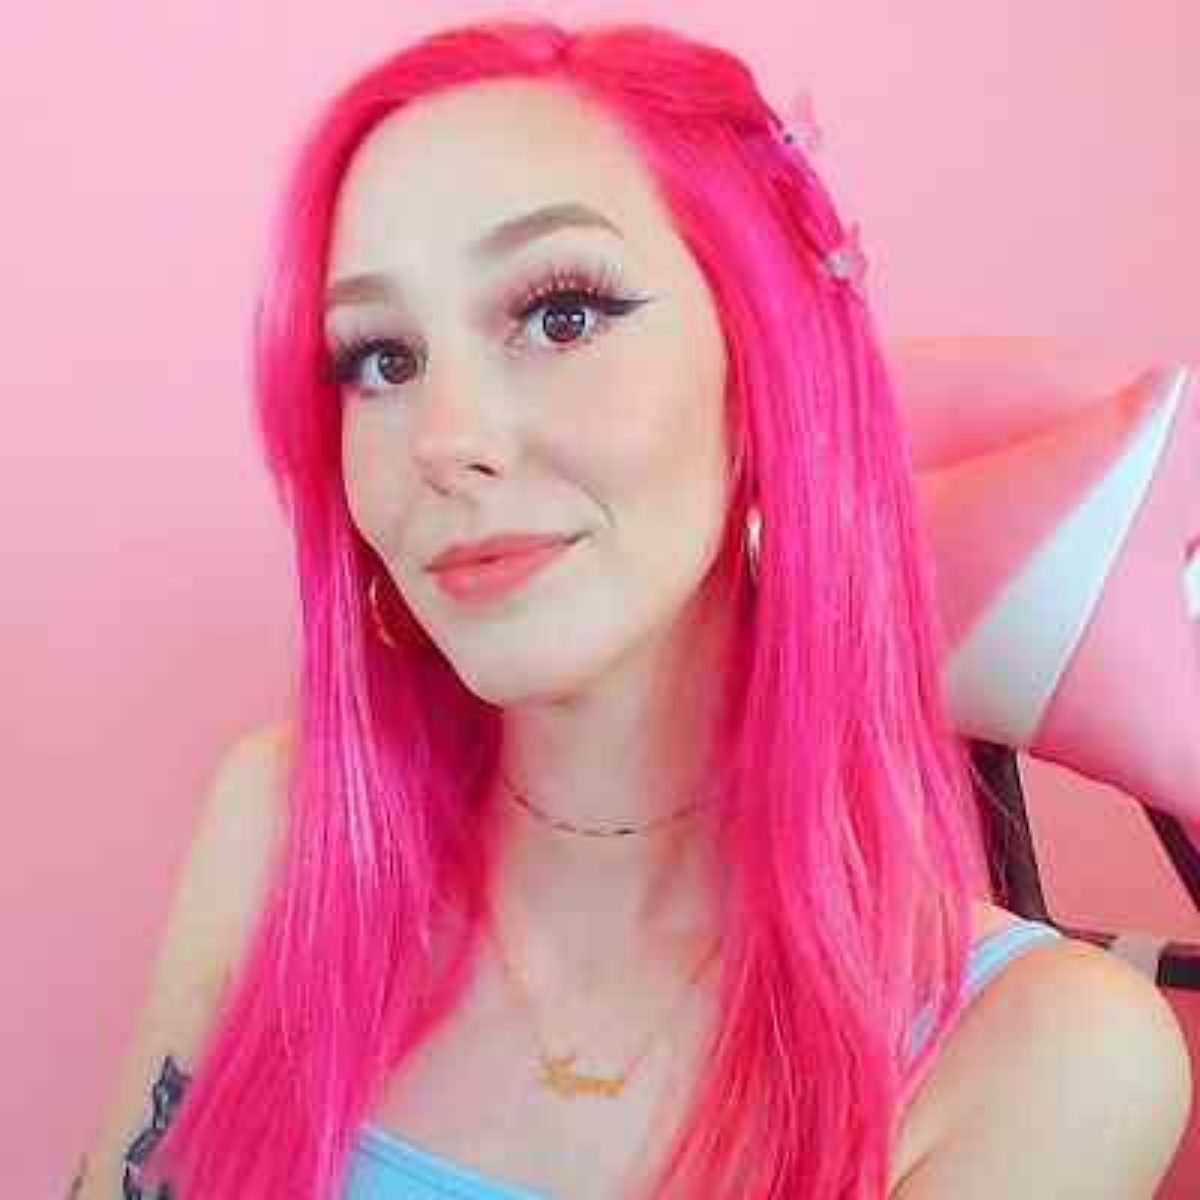 What is meganplays email